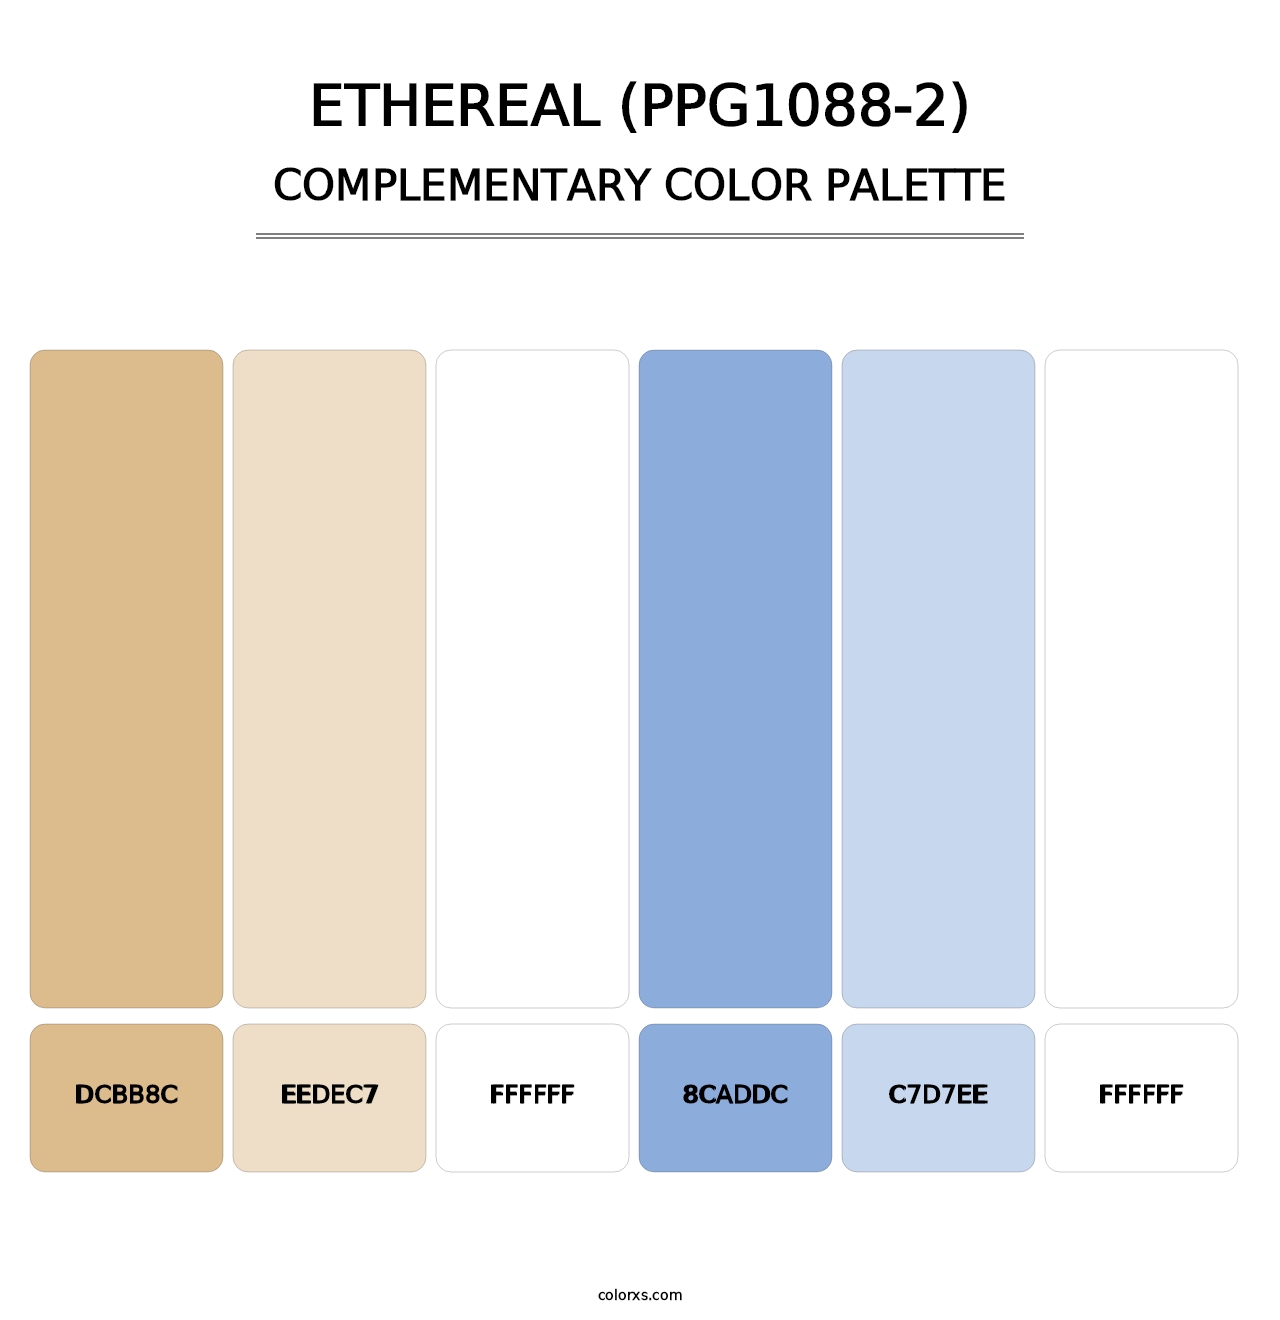 Ethereal (PPG1088-2) - Complementary Color Palette